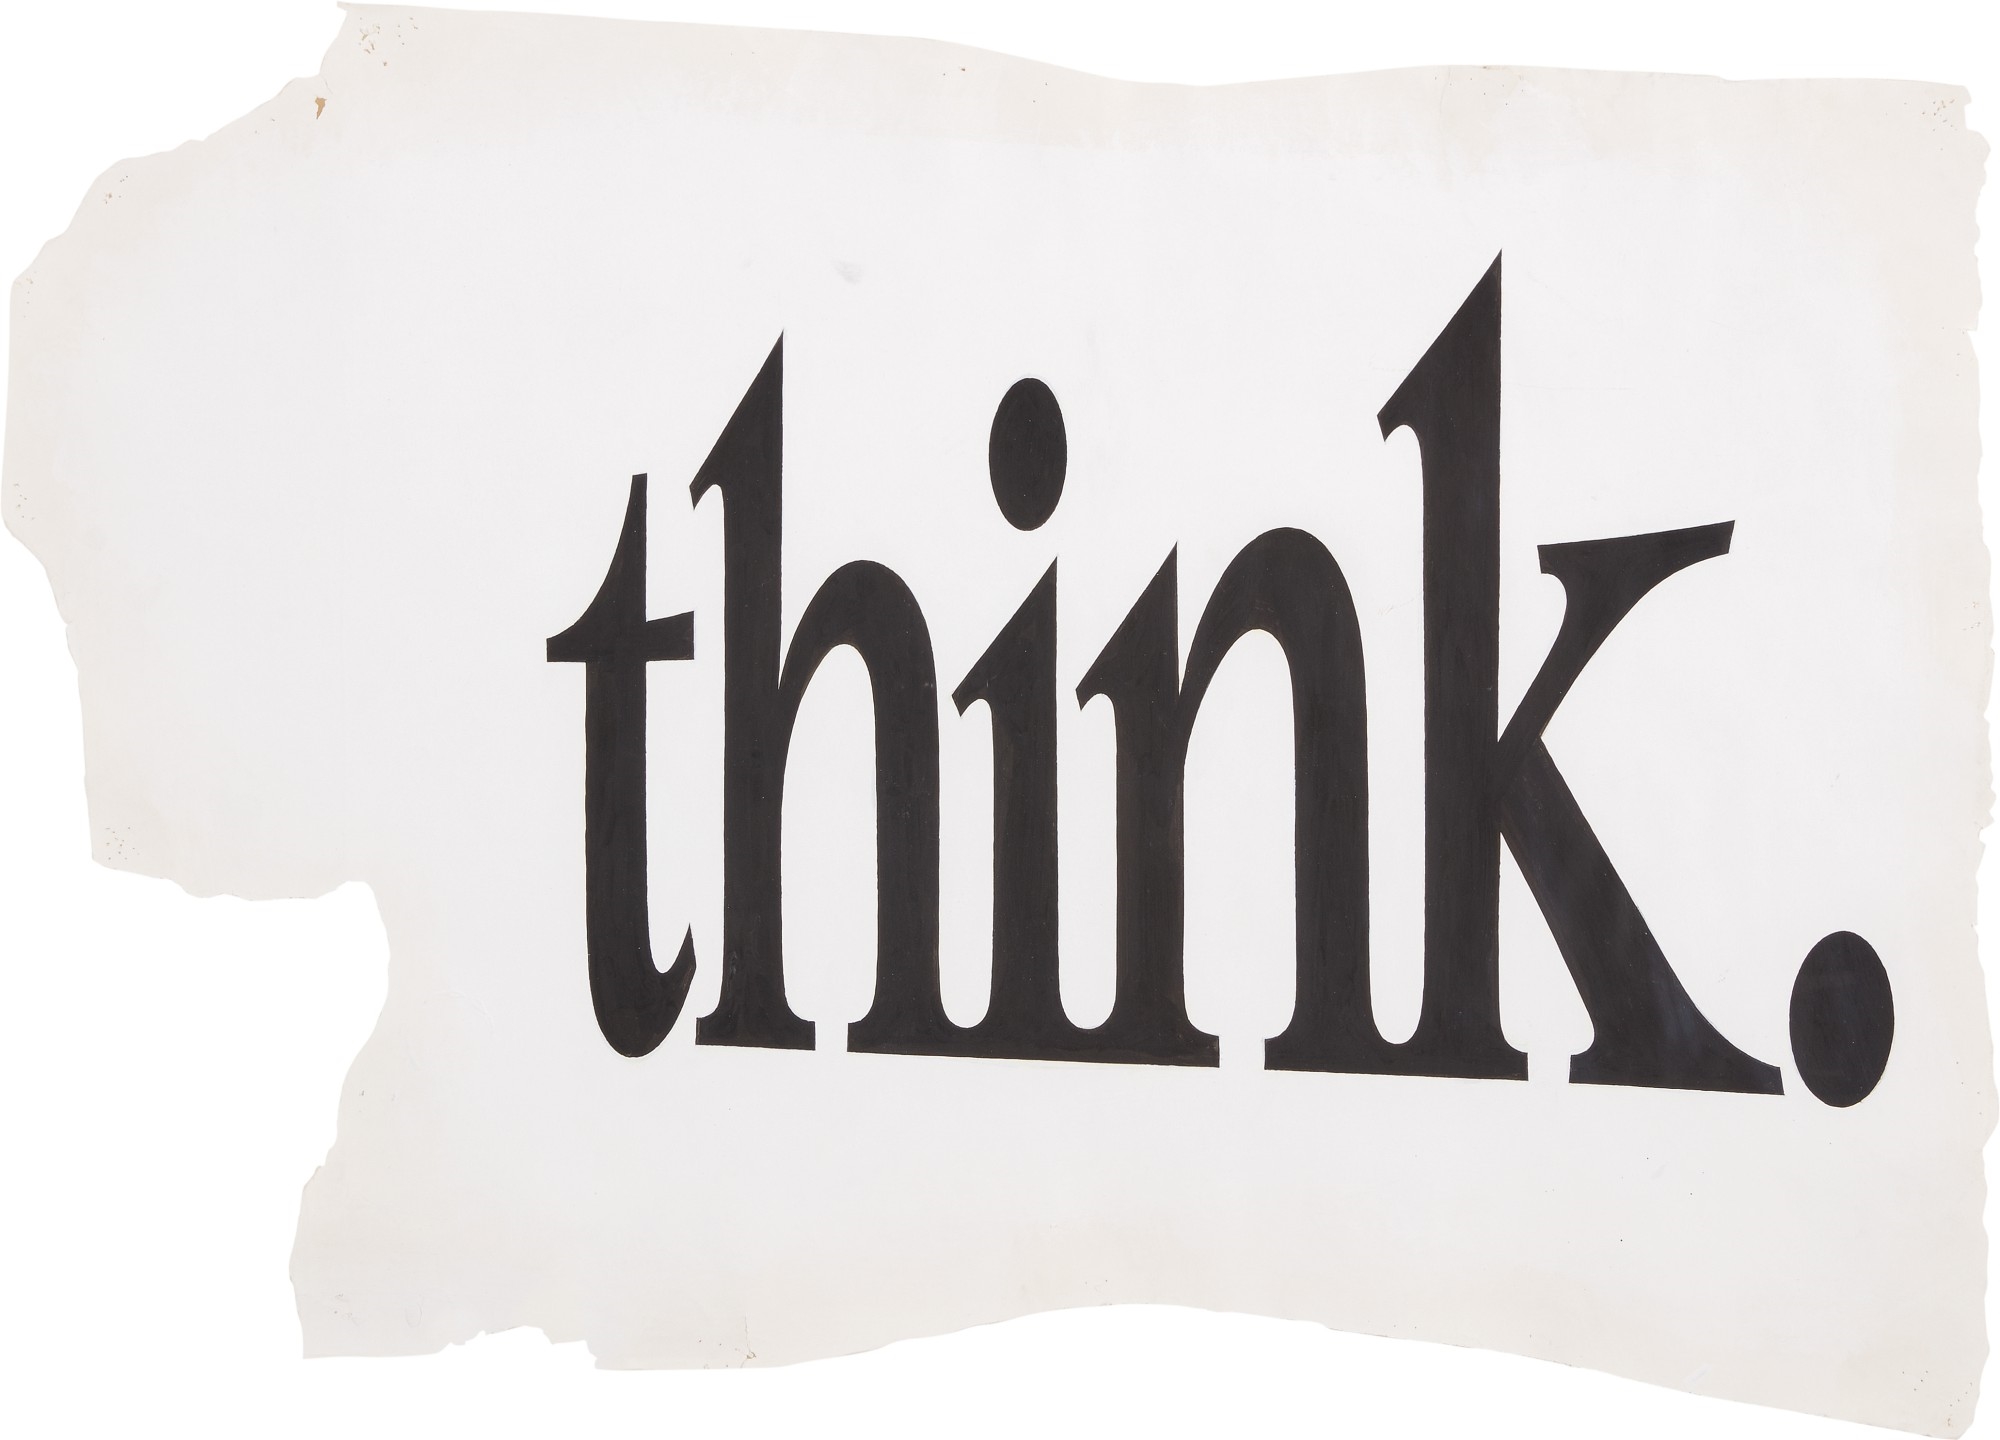 Think by Ricci Albenda, Executed in 1996